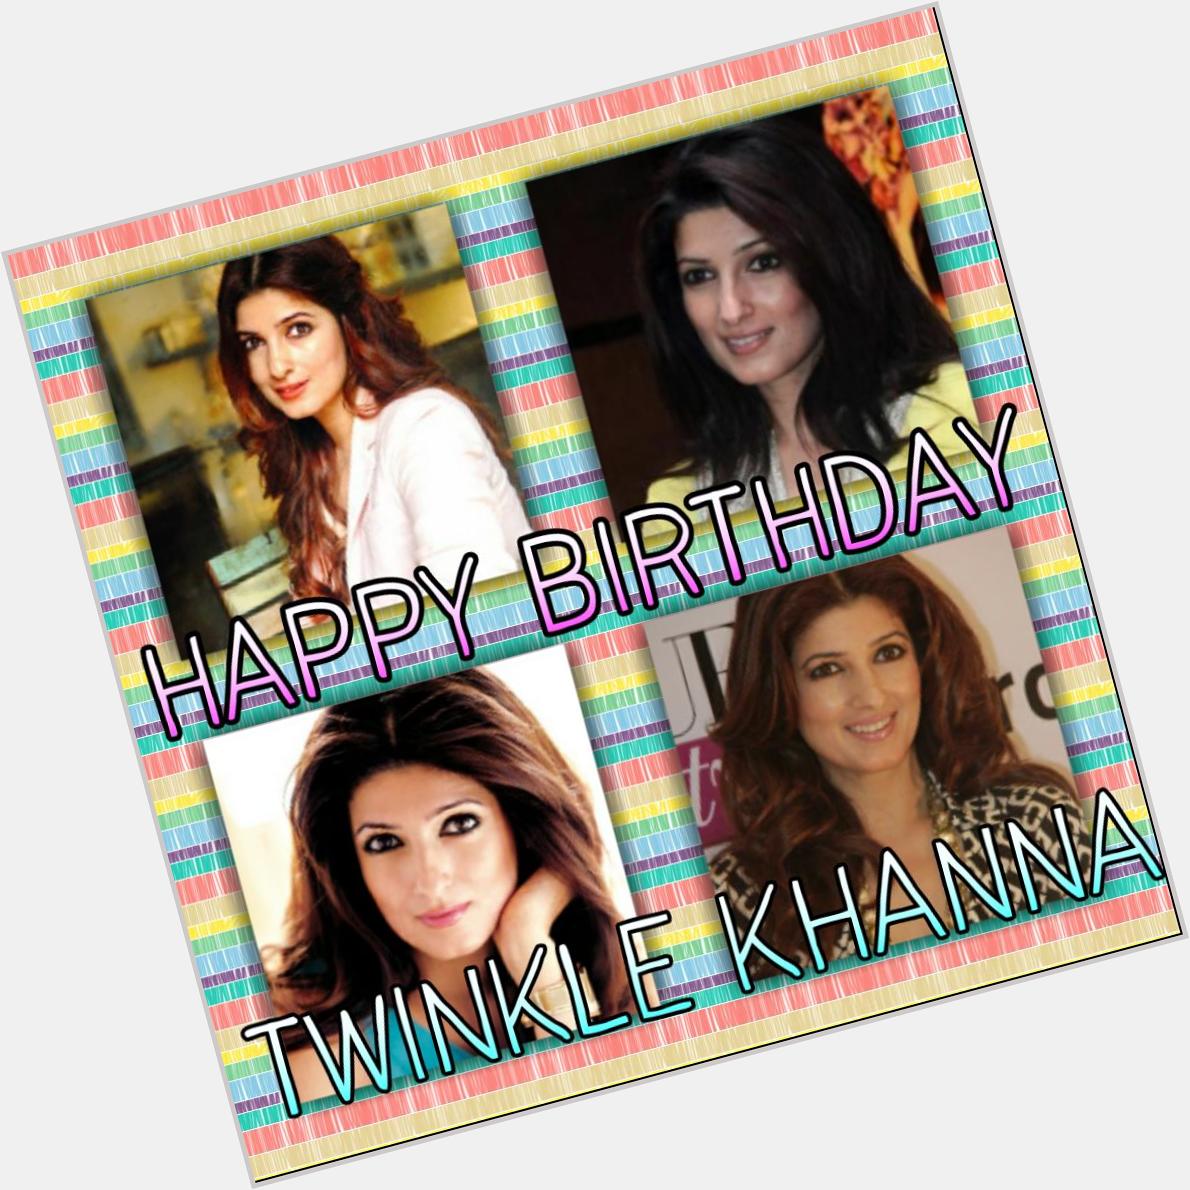 Happy Birthday Twinkle Khanna stay amazing and wonderful.
god bless you..enjoy your Bday   Love you 